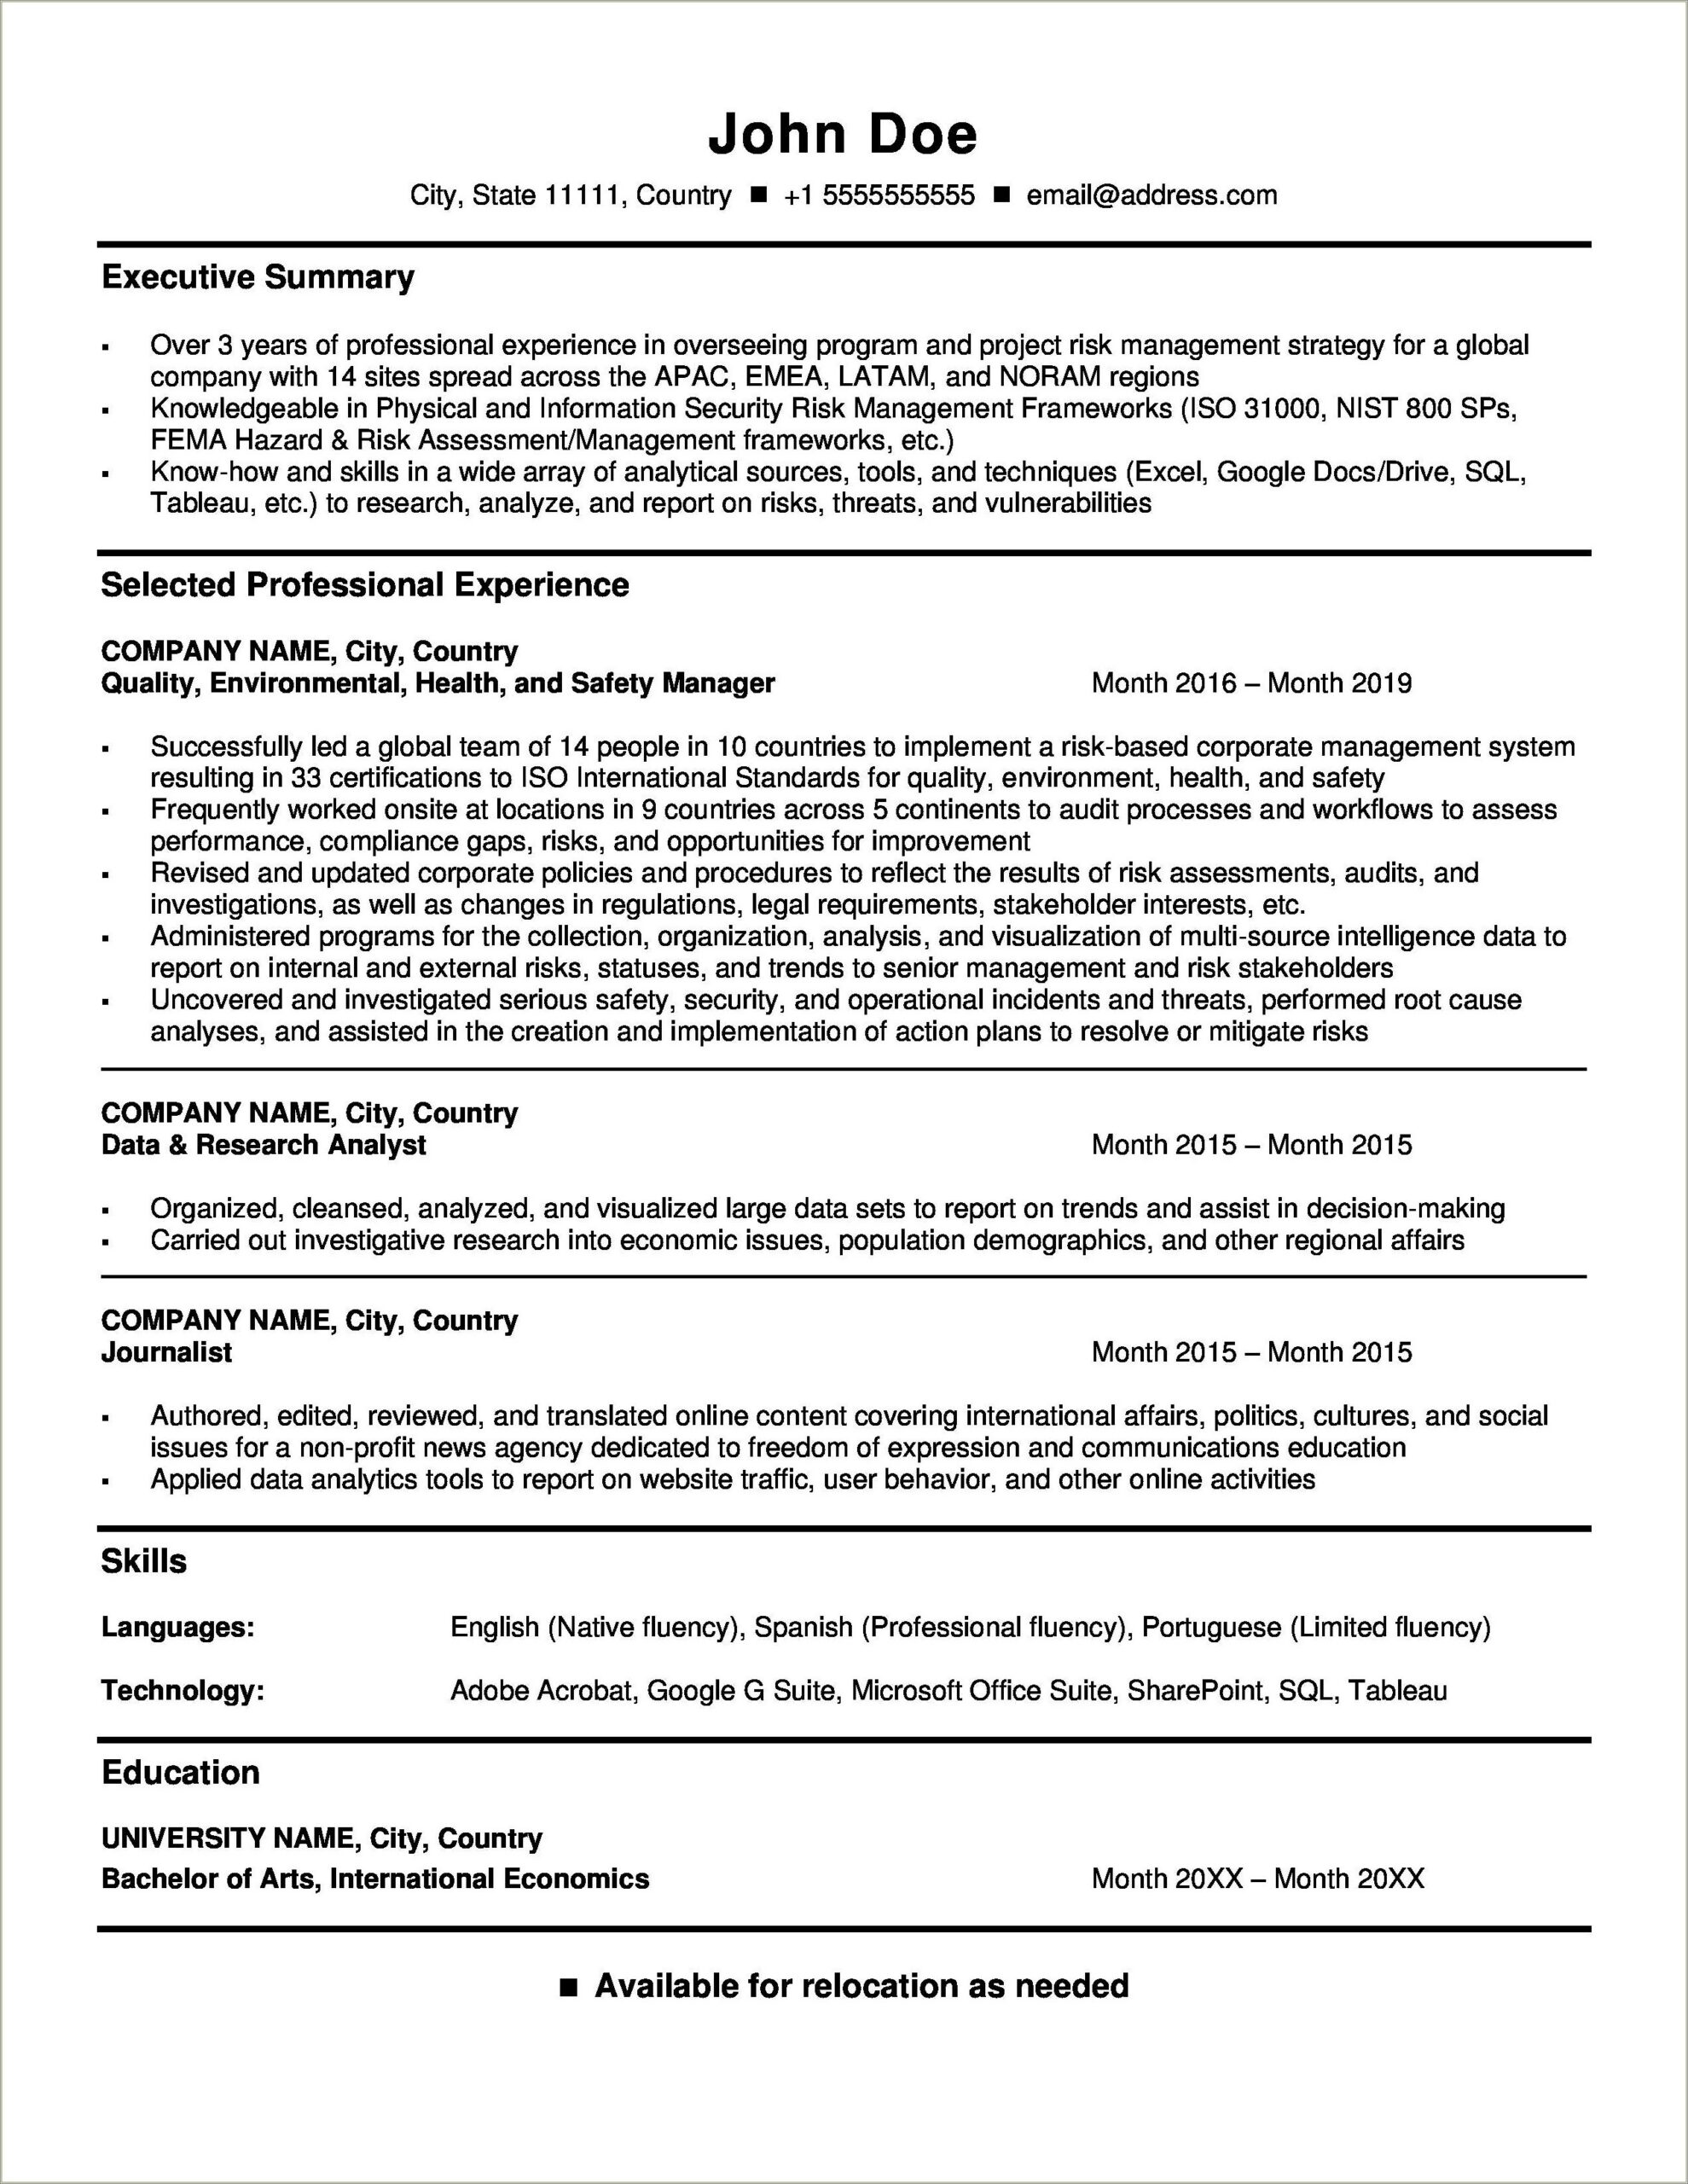 Resume Template After 3 Year Disability Gap